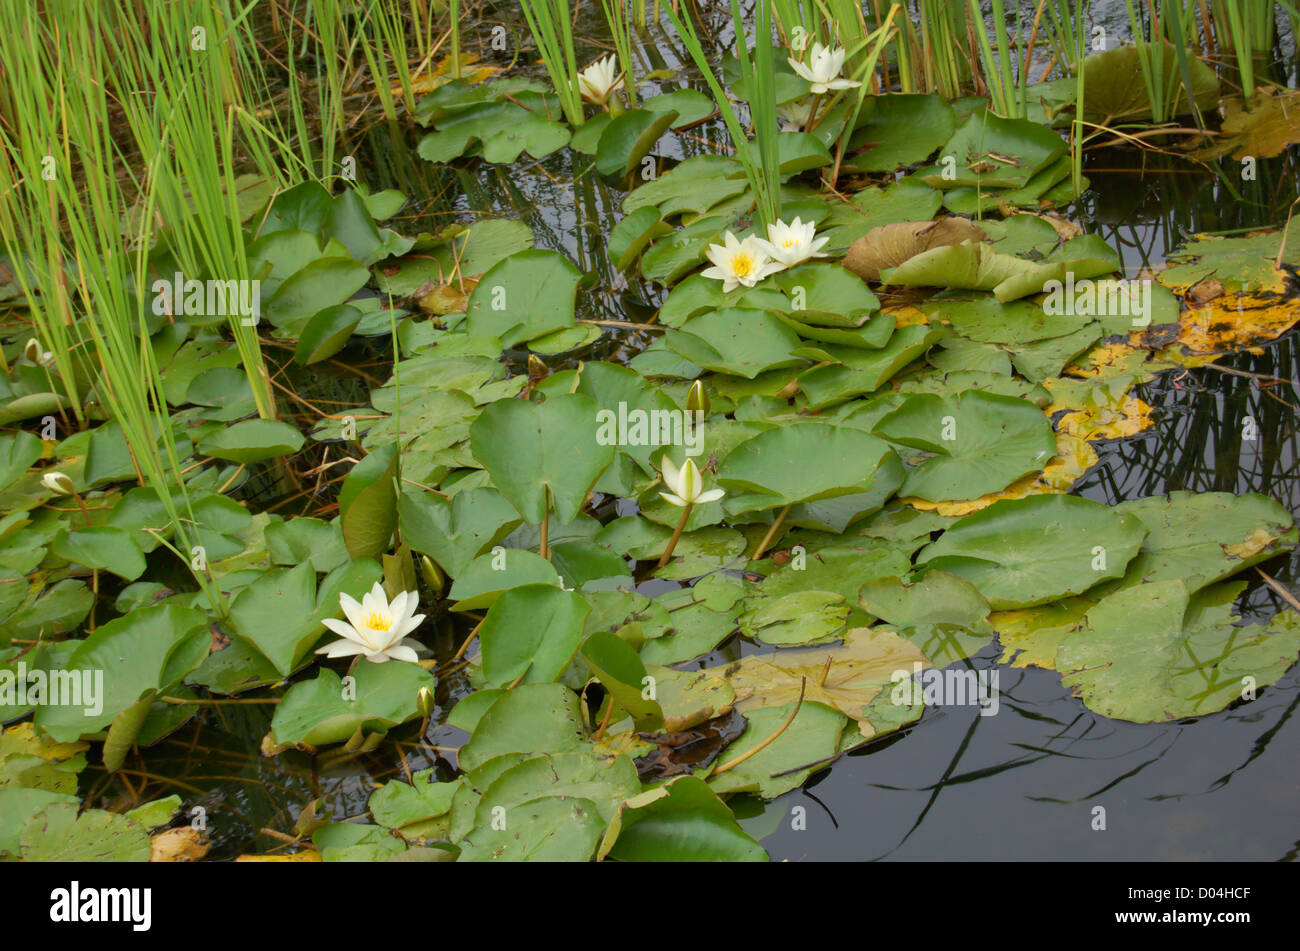 Water lillies and reeds on the surface of a pond Stock Photo